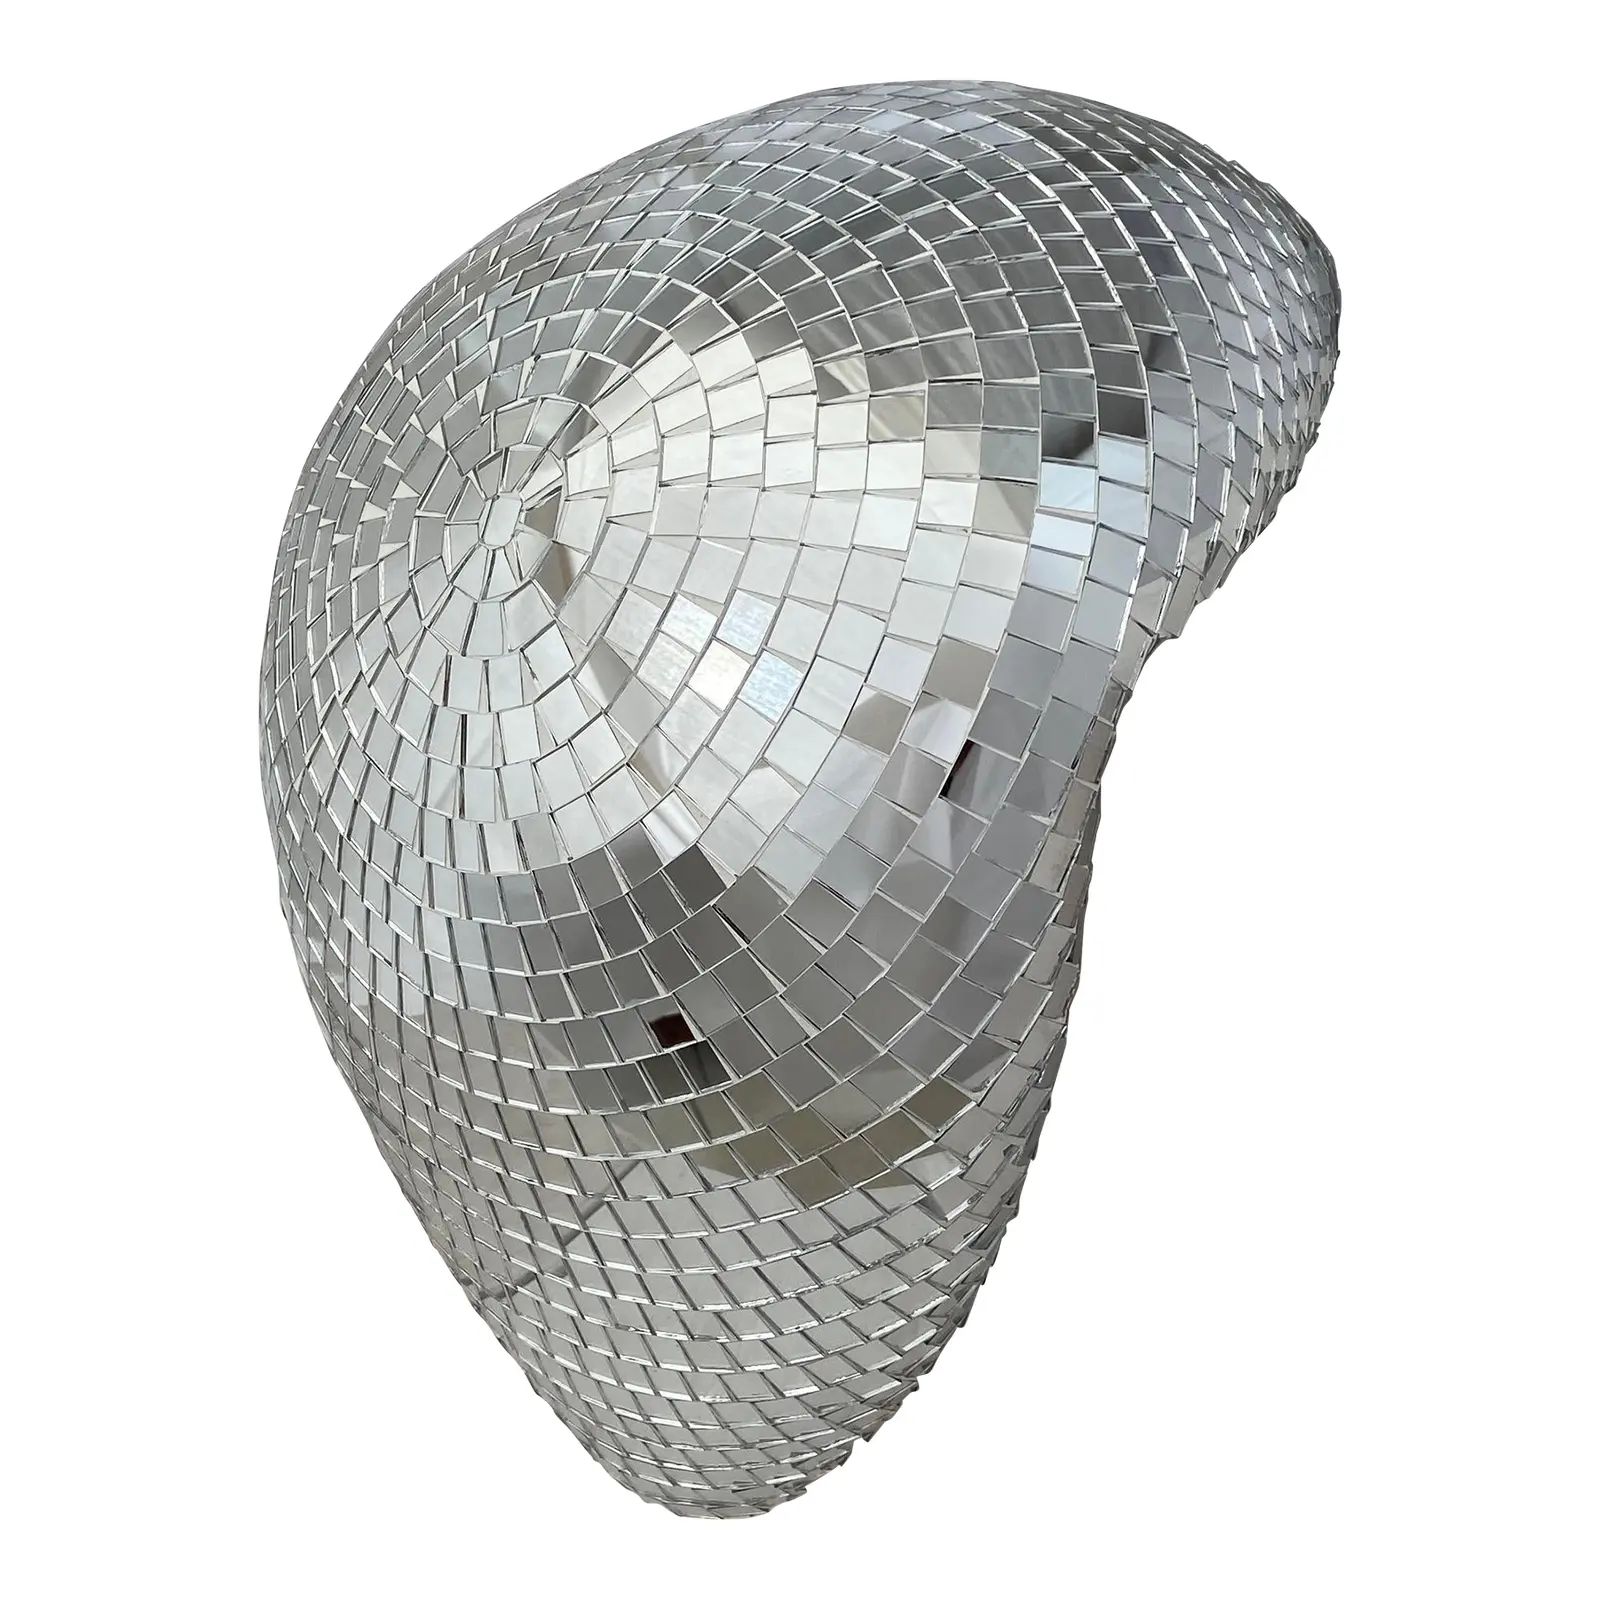 Contemporary Mosaic Melted Disco Ball Sculpture | Chairish